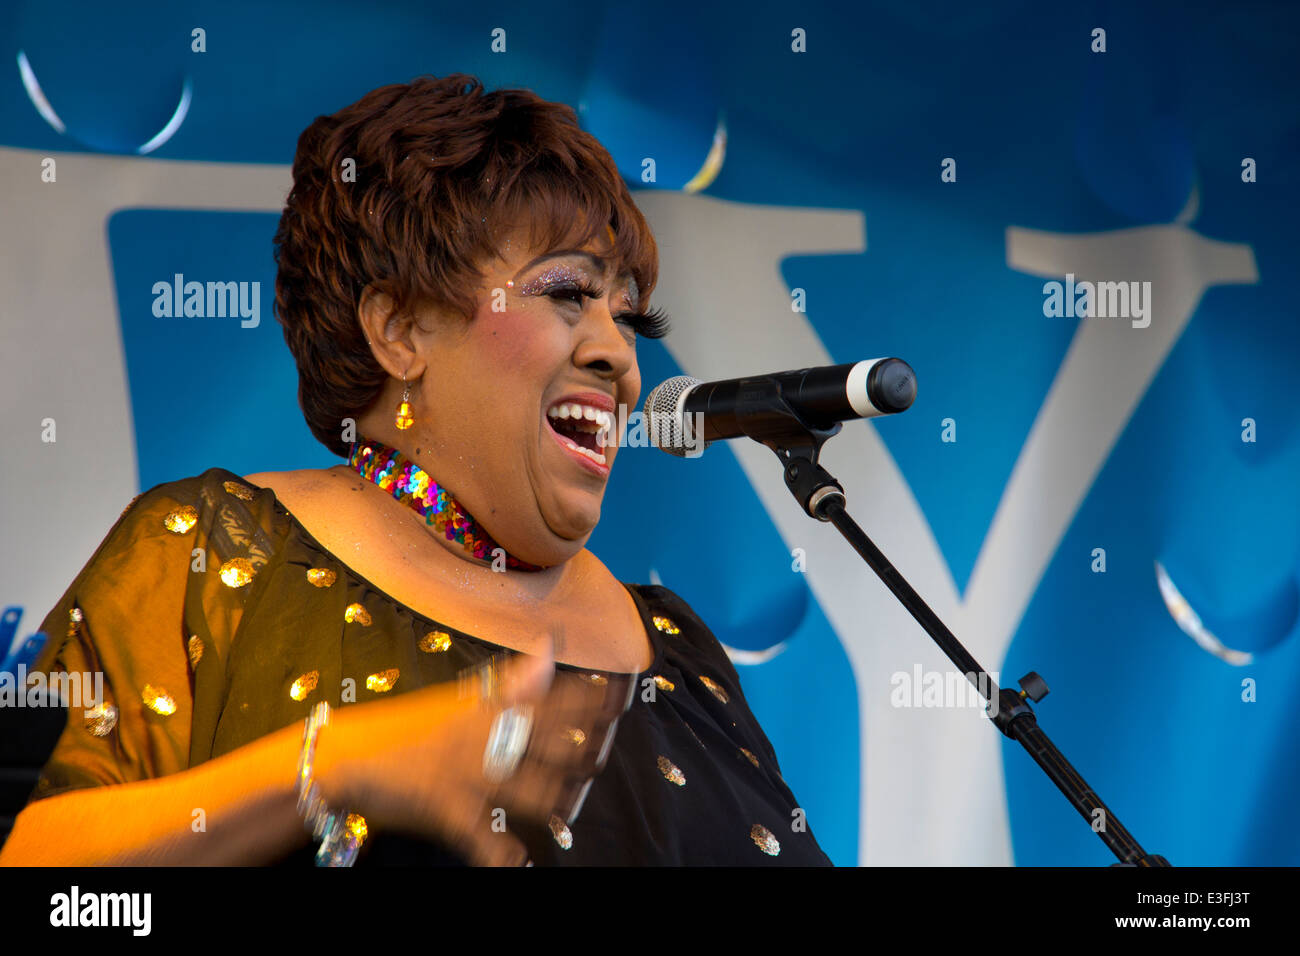 Linda Cole, niece of the late-great Nat King Cole, sings at the 33rd annual St. Augustine Lions Seafood Festival, FL Stock Photo